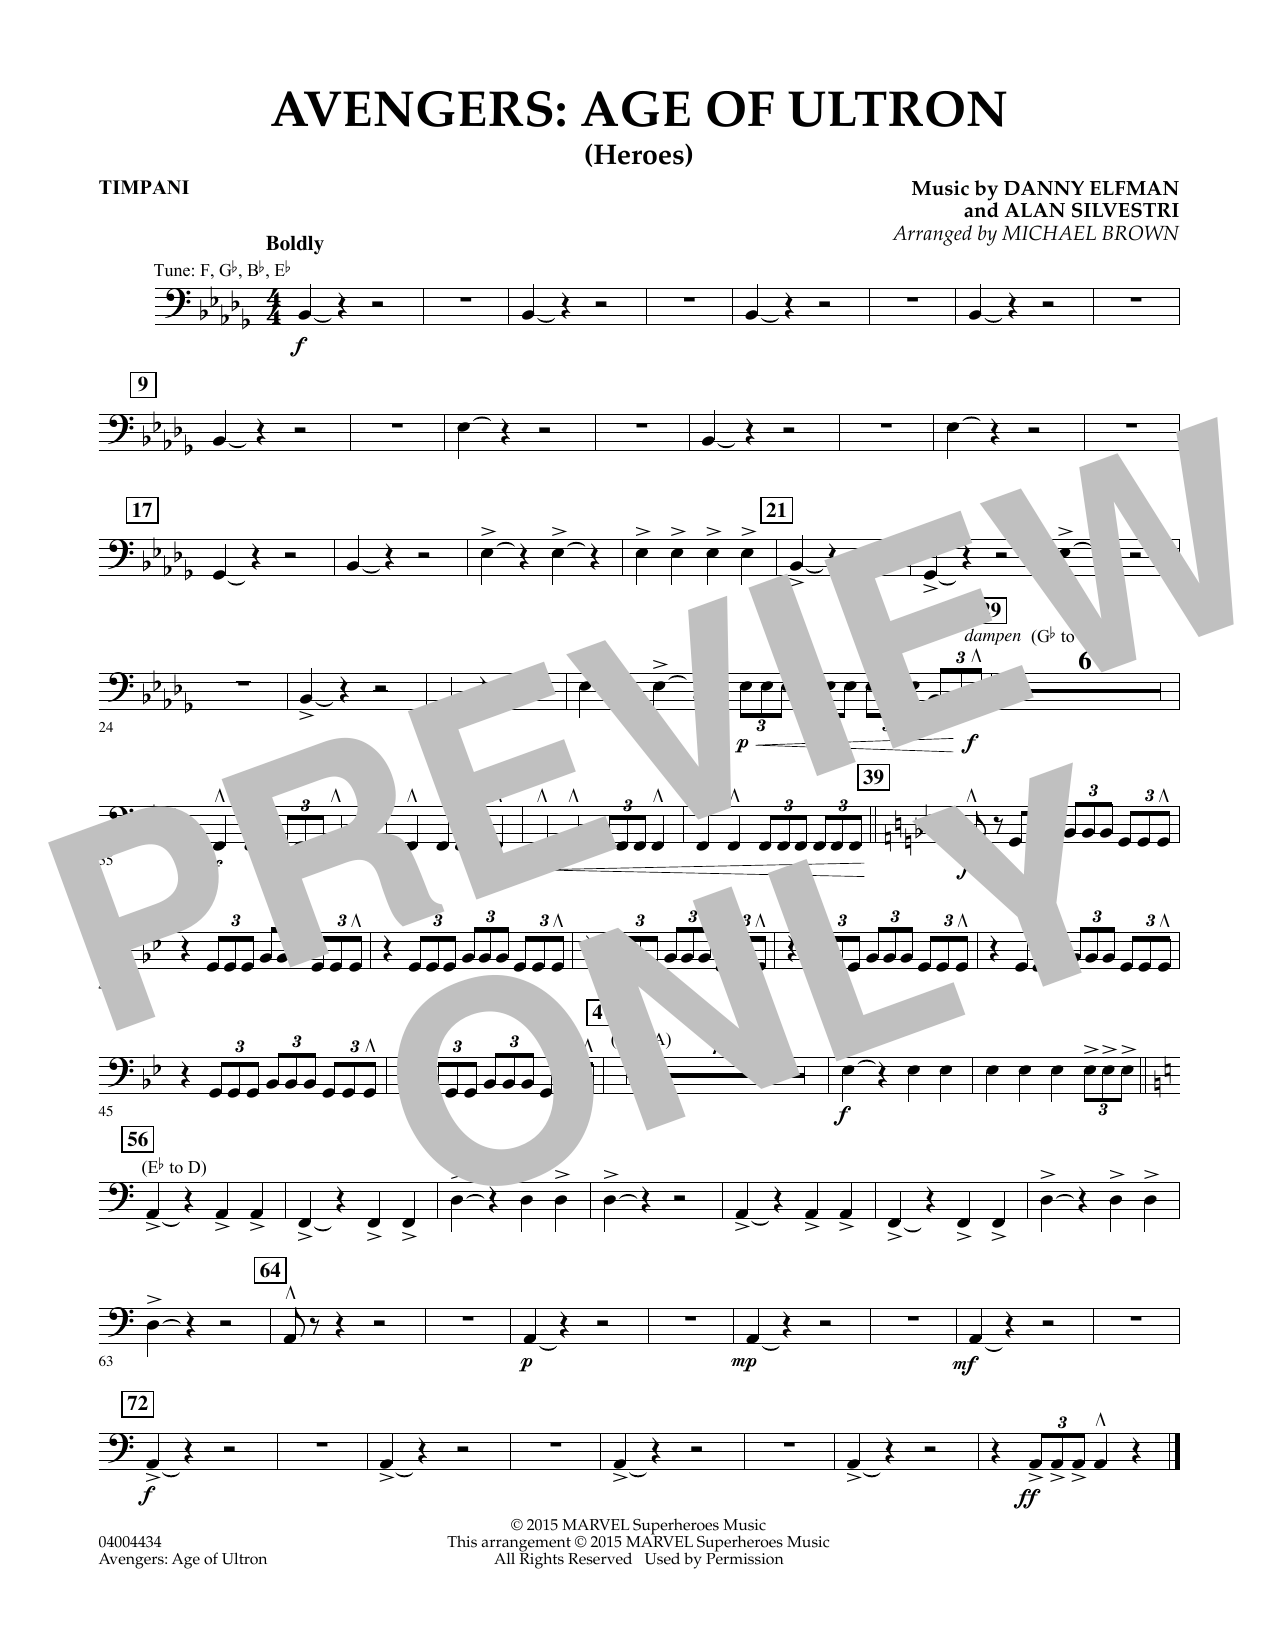 Michael Brown Avengers: The Age of Ultron (Main Theme) - Timpani sheet music notes and chords. Download Printable PDF.